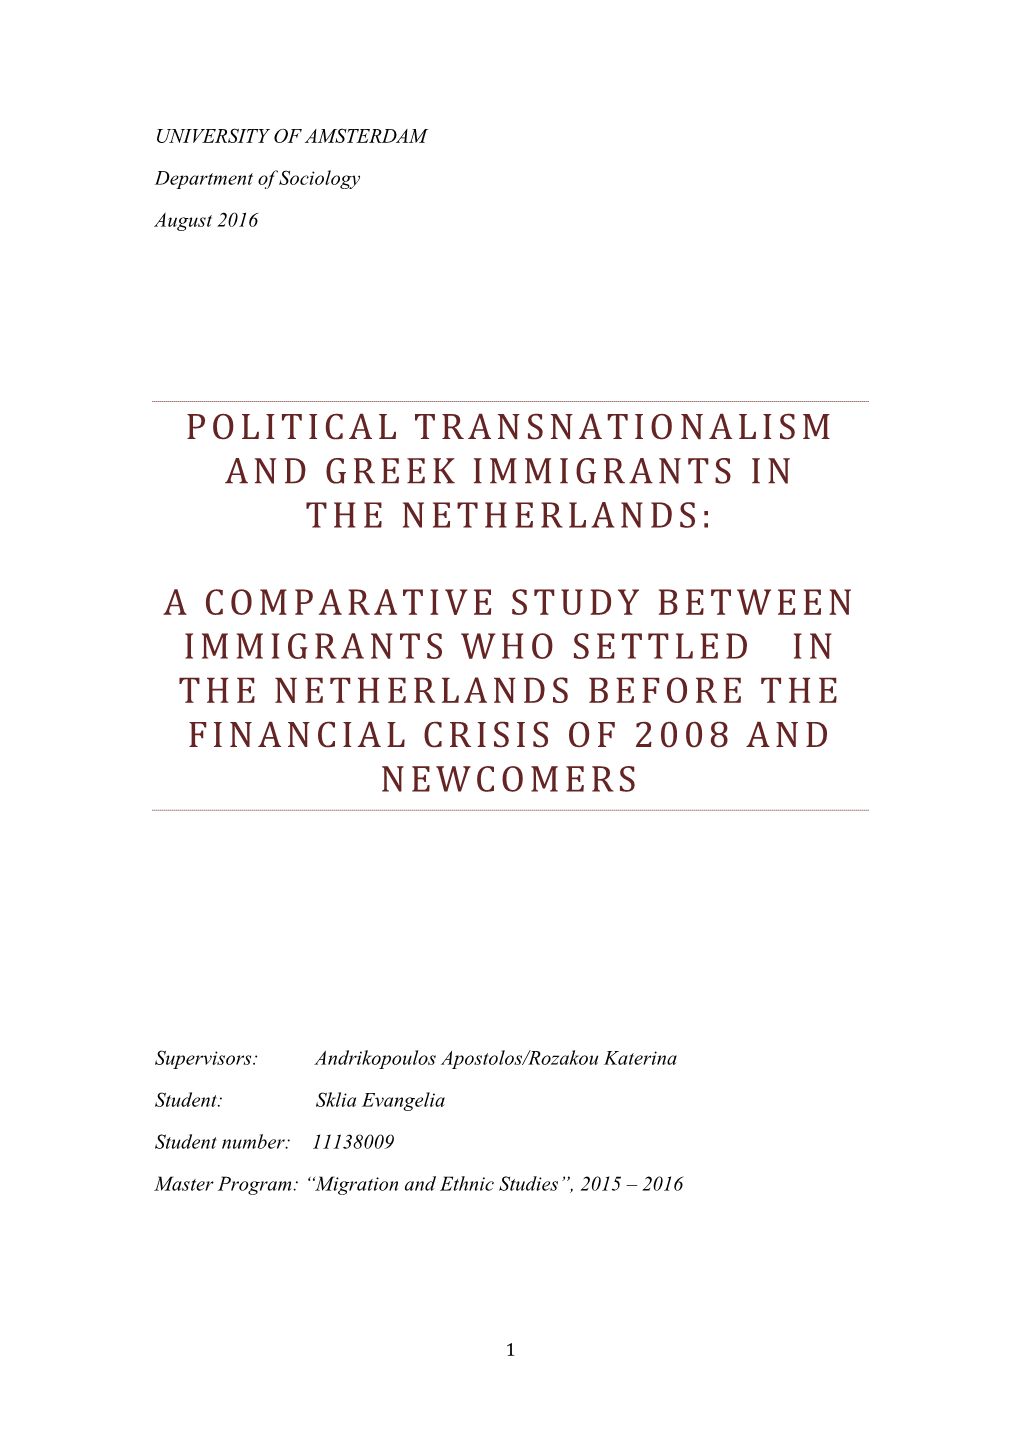 Political Transnationalism and Greek Immigrants in the Netherlands